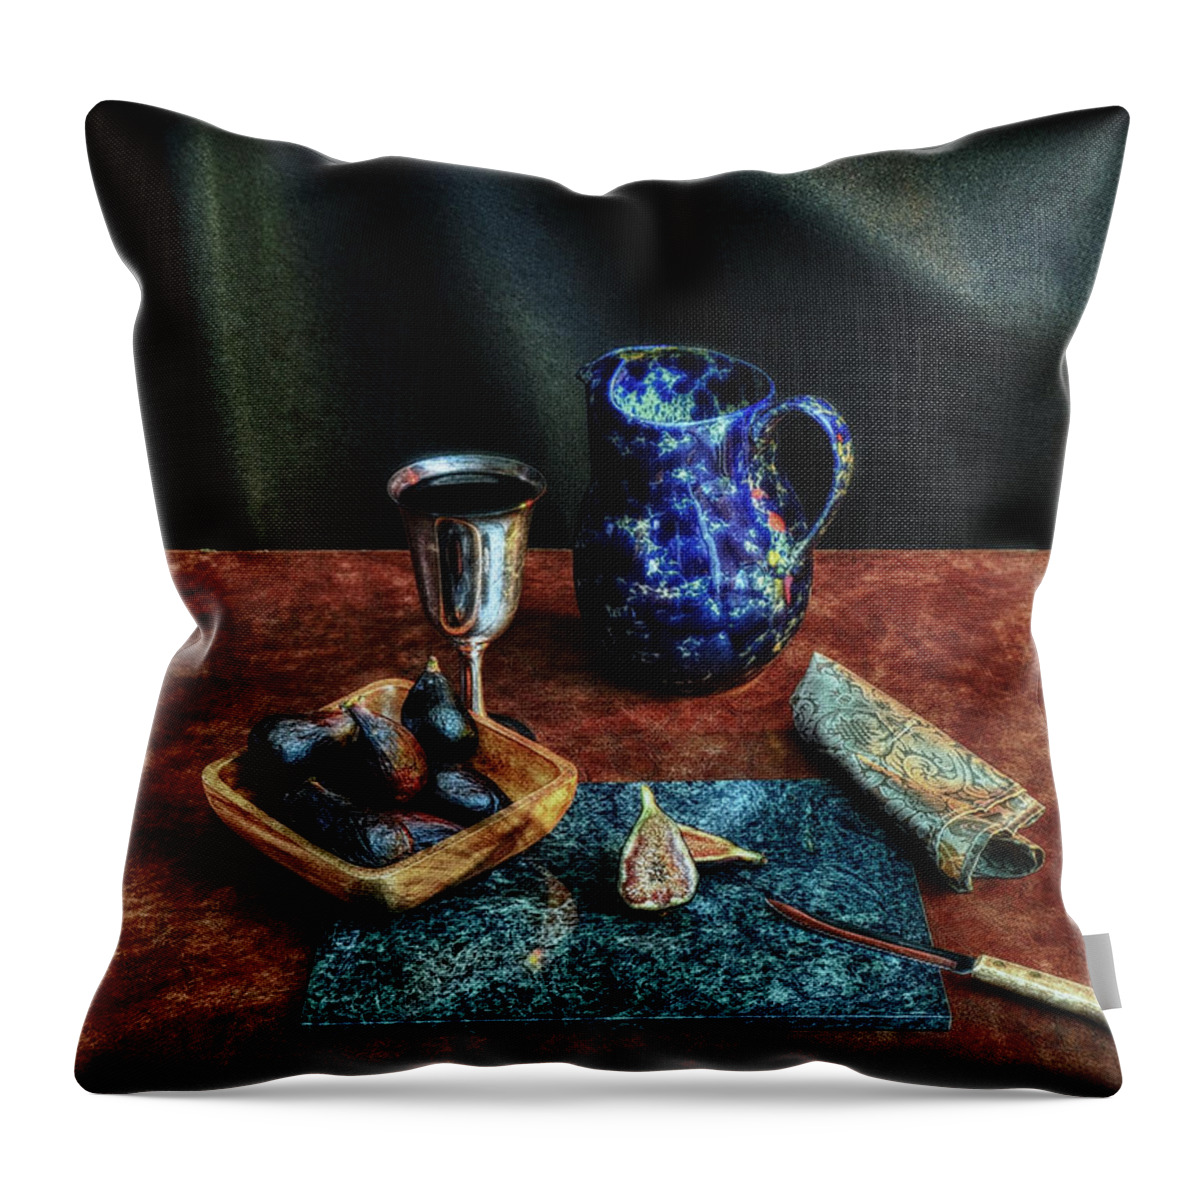 Figs Throw Pillow featuring the photograph Summer Figs And Wine by Mark Fuller